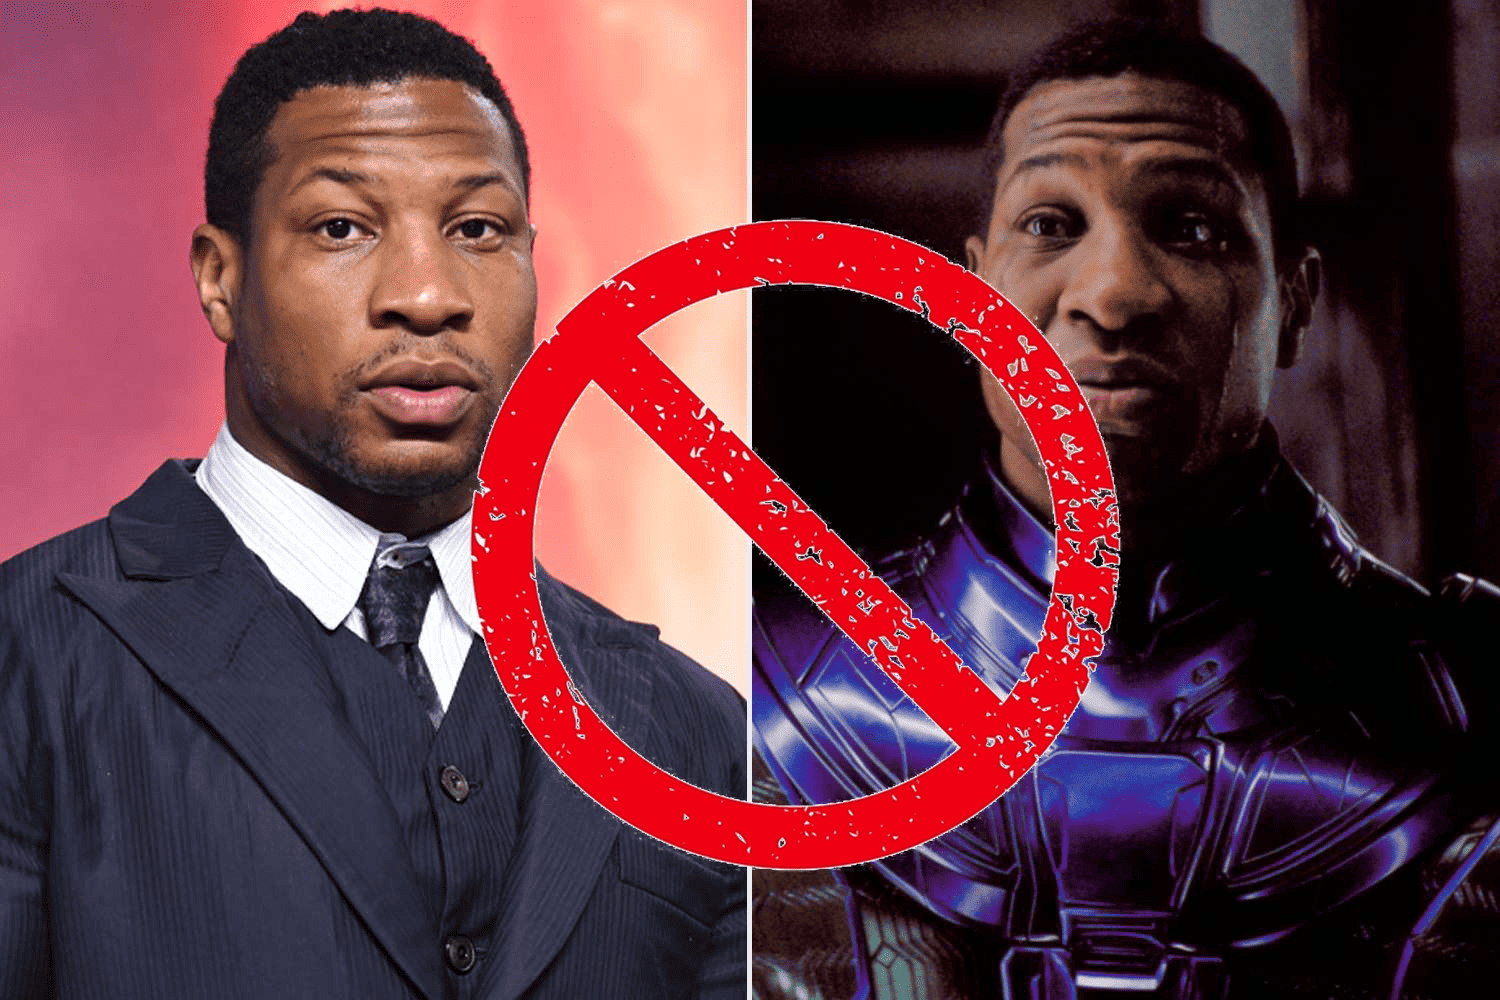 Marvel Studios drops Jonathan Majors after being found guilty of assaulting former girlfriend